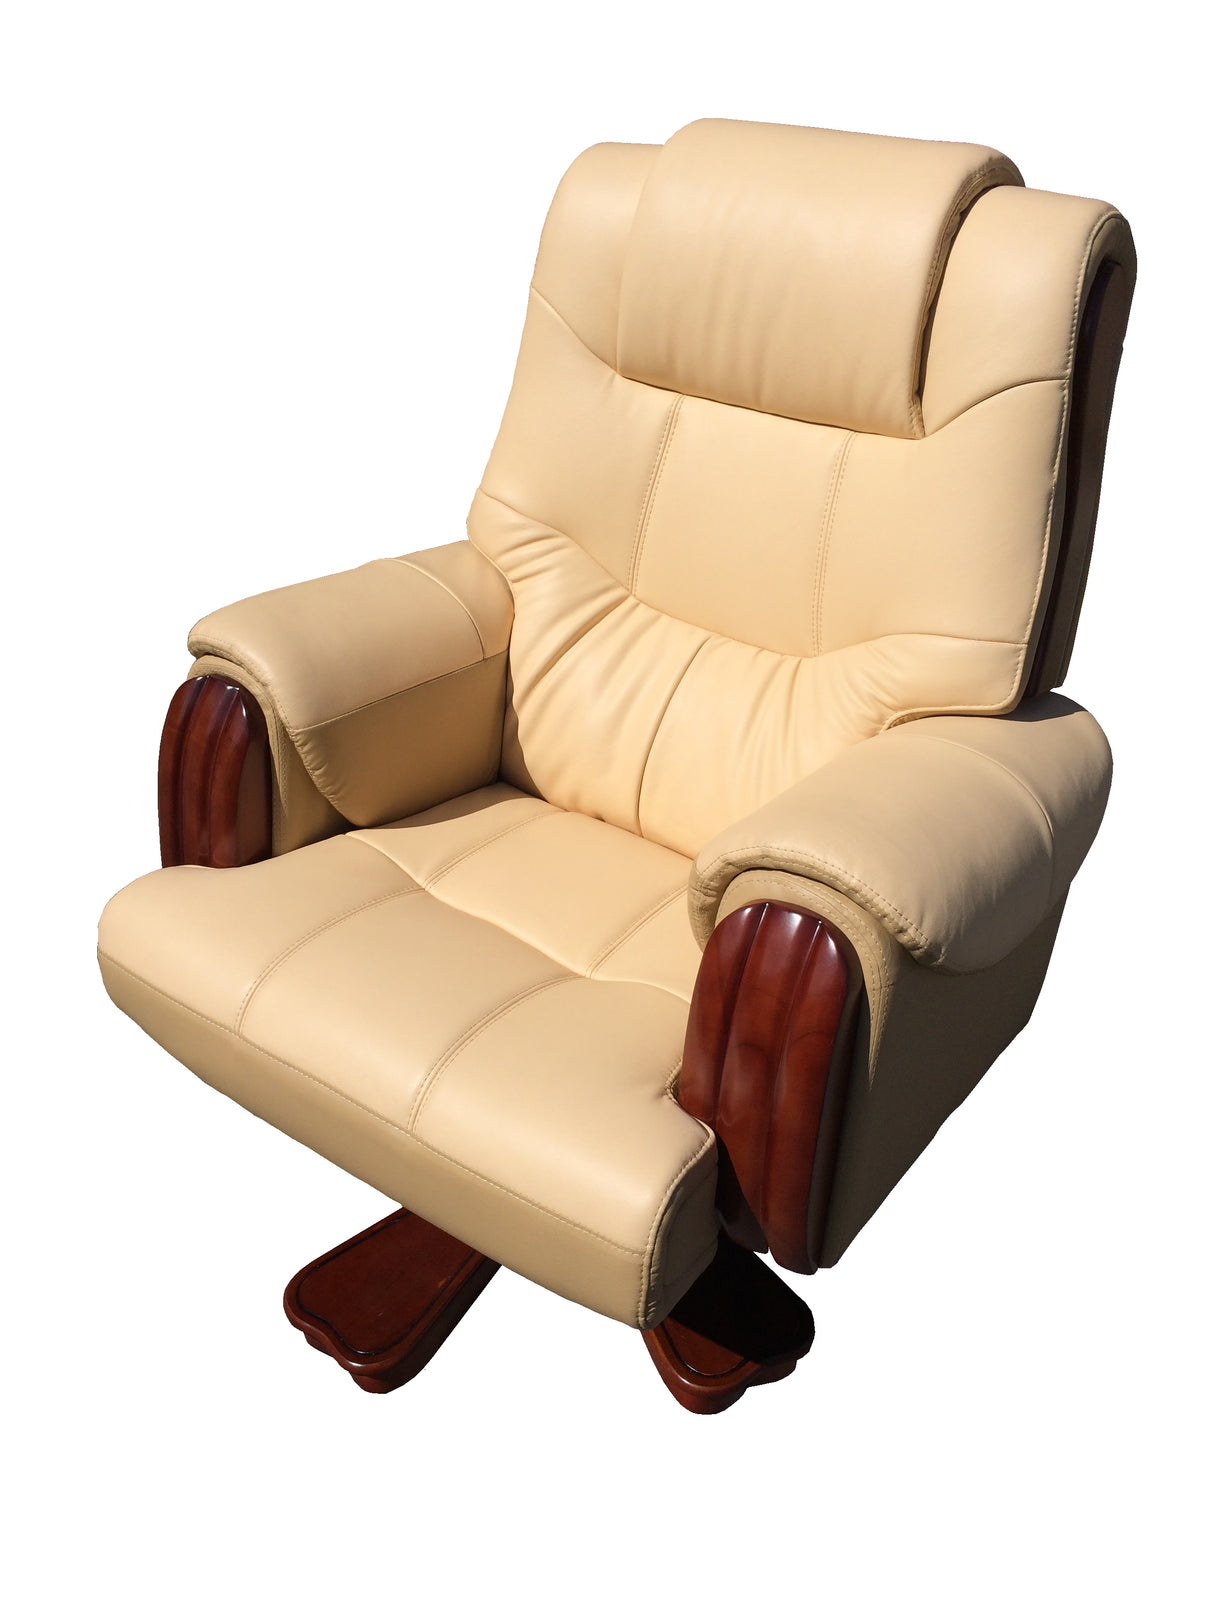 Extra Large Executive Office Chair in Beige Leather - CHA-335-B